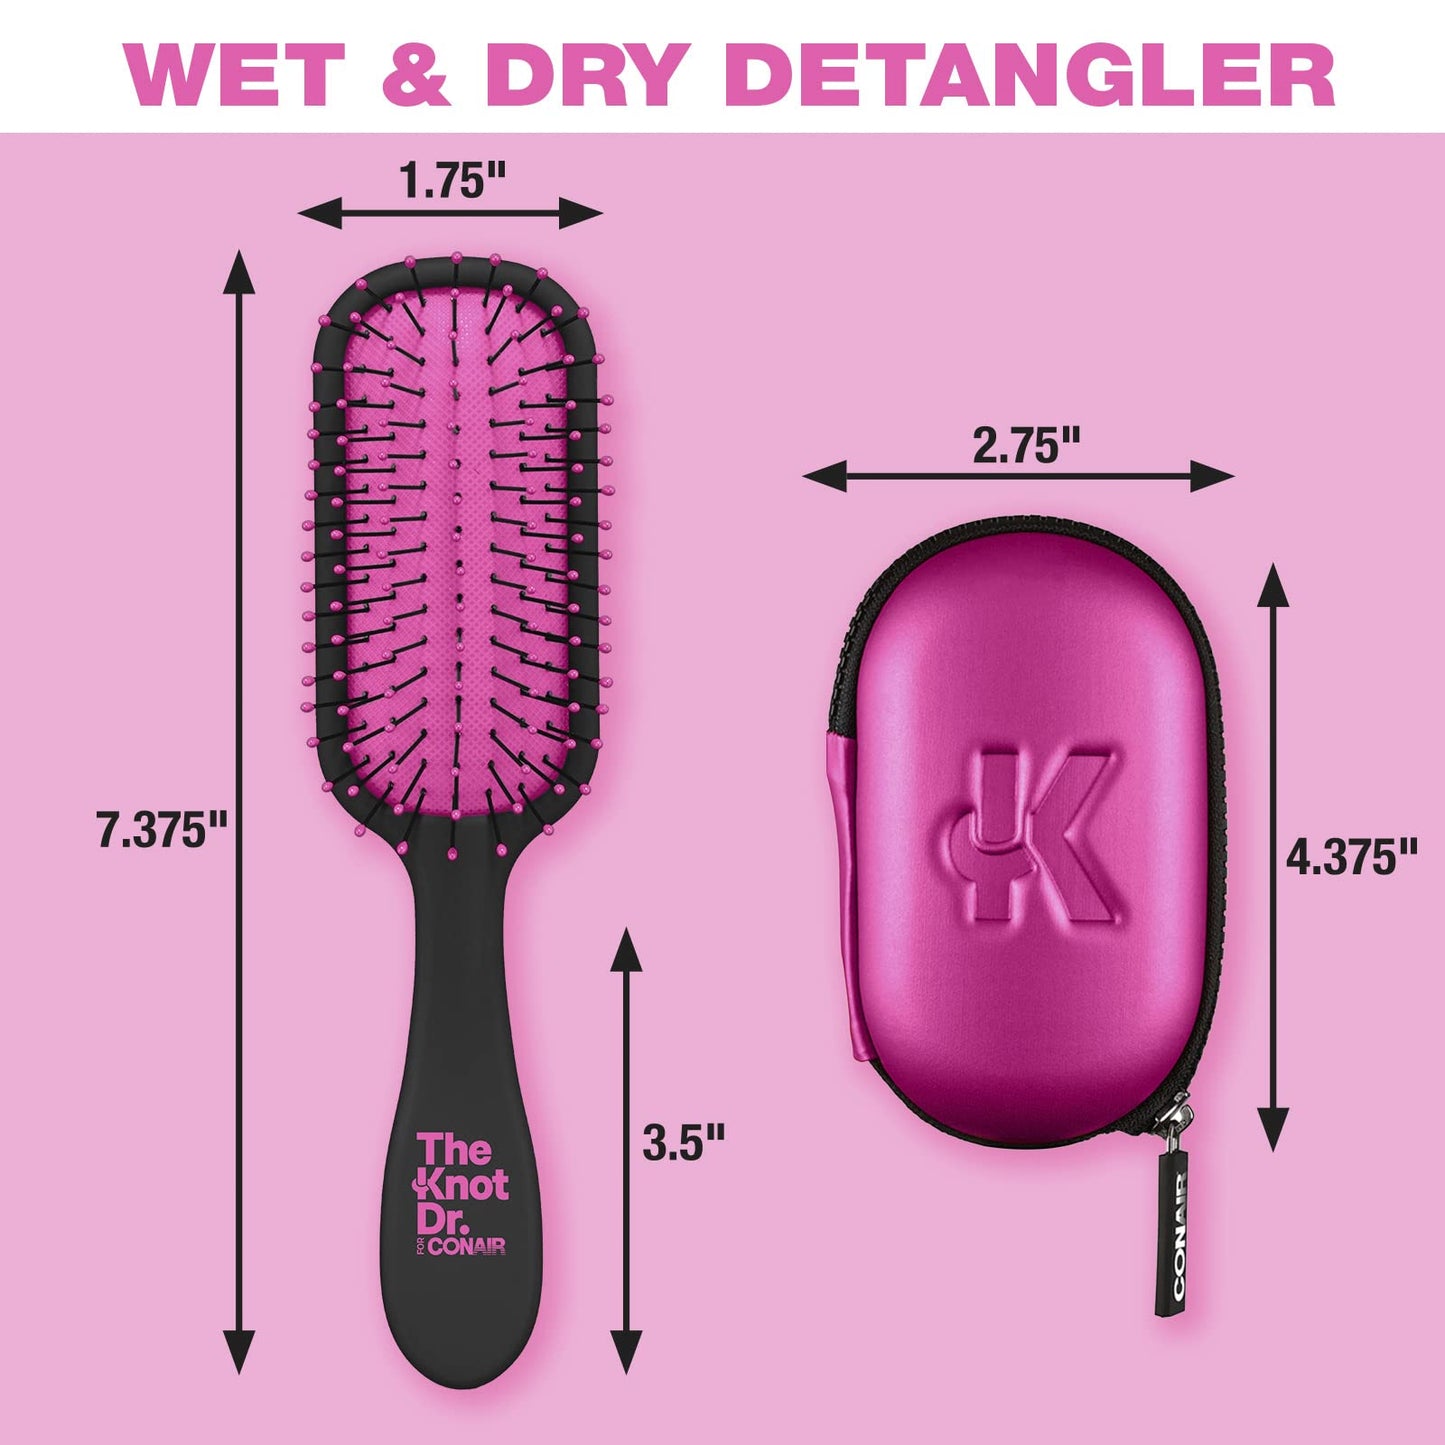 The Knot Dr. hair brush by Conair - Detangling hair brush - Travel Brush - wet brush - Removes Knots and Tangles in wet or dry hair- Pink